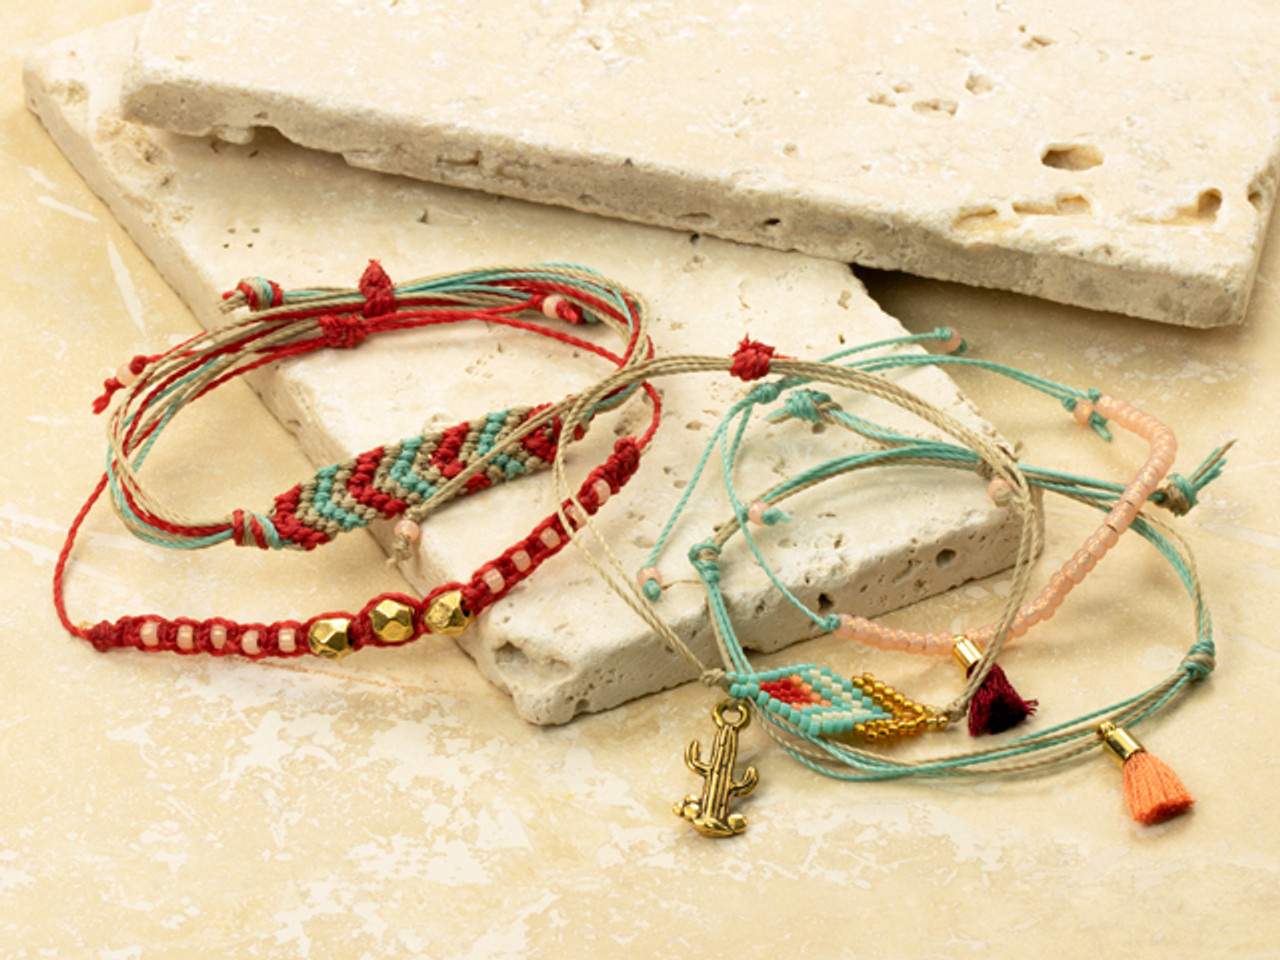 How to make a bead bracelet: the ultimate guide to getting started